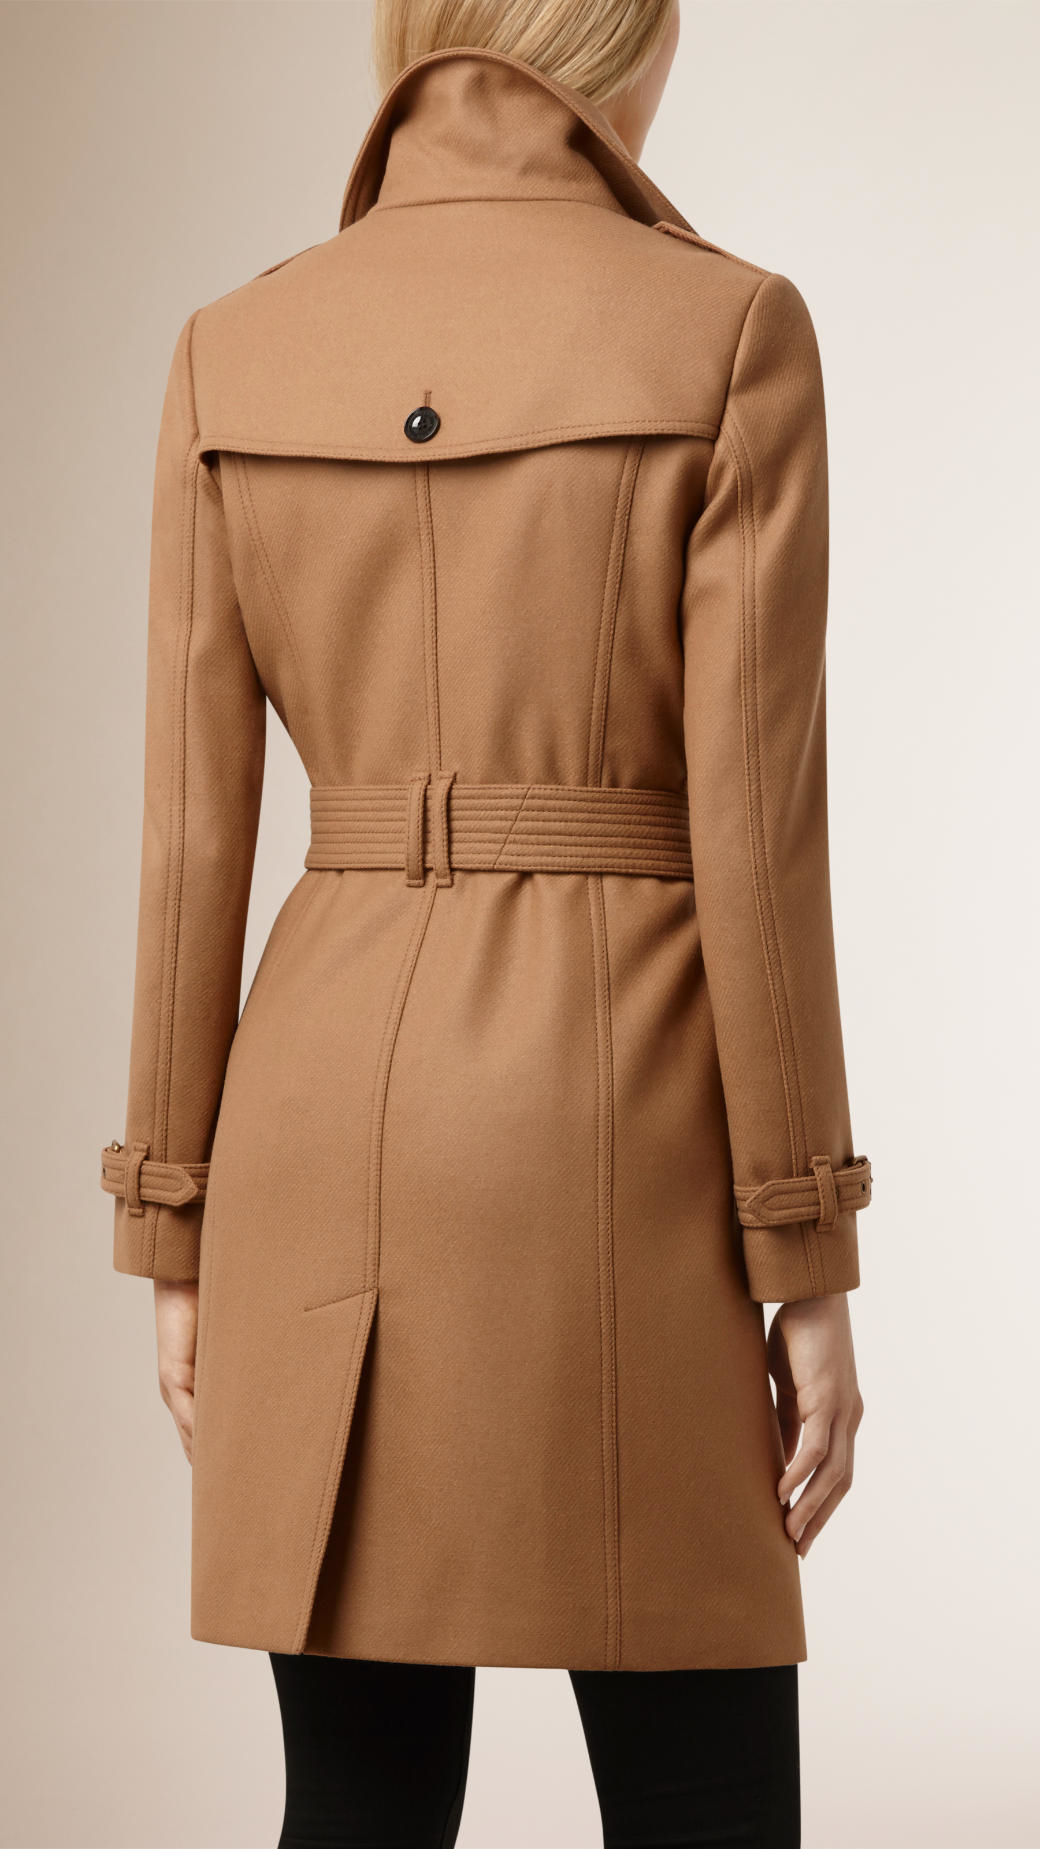 Lyst - Burberry Virgin Wool Cashmere Blend Trench Coat in Brown